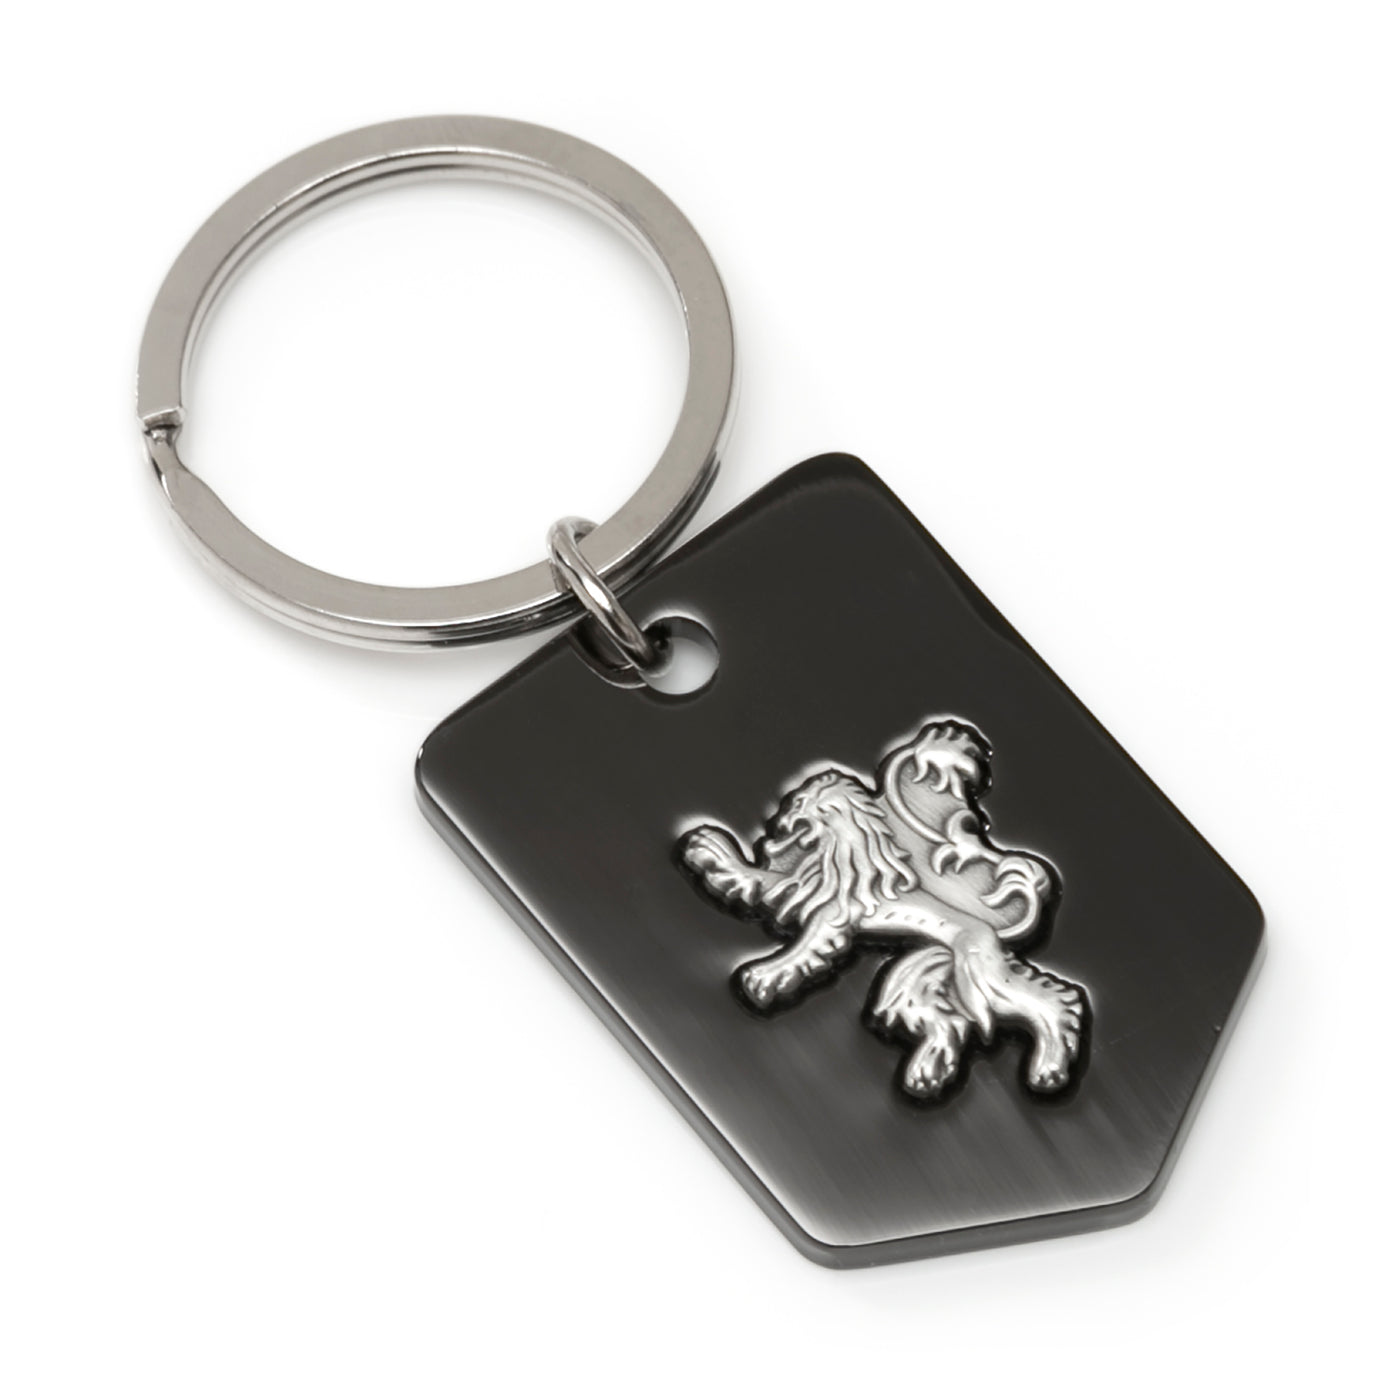 Game of Thrones Lannister Lion Key Chain